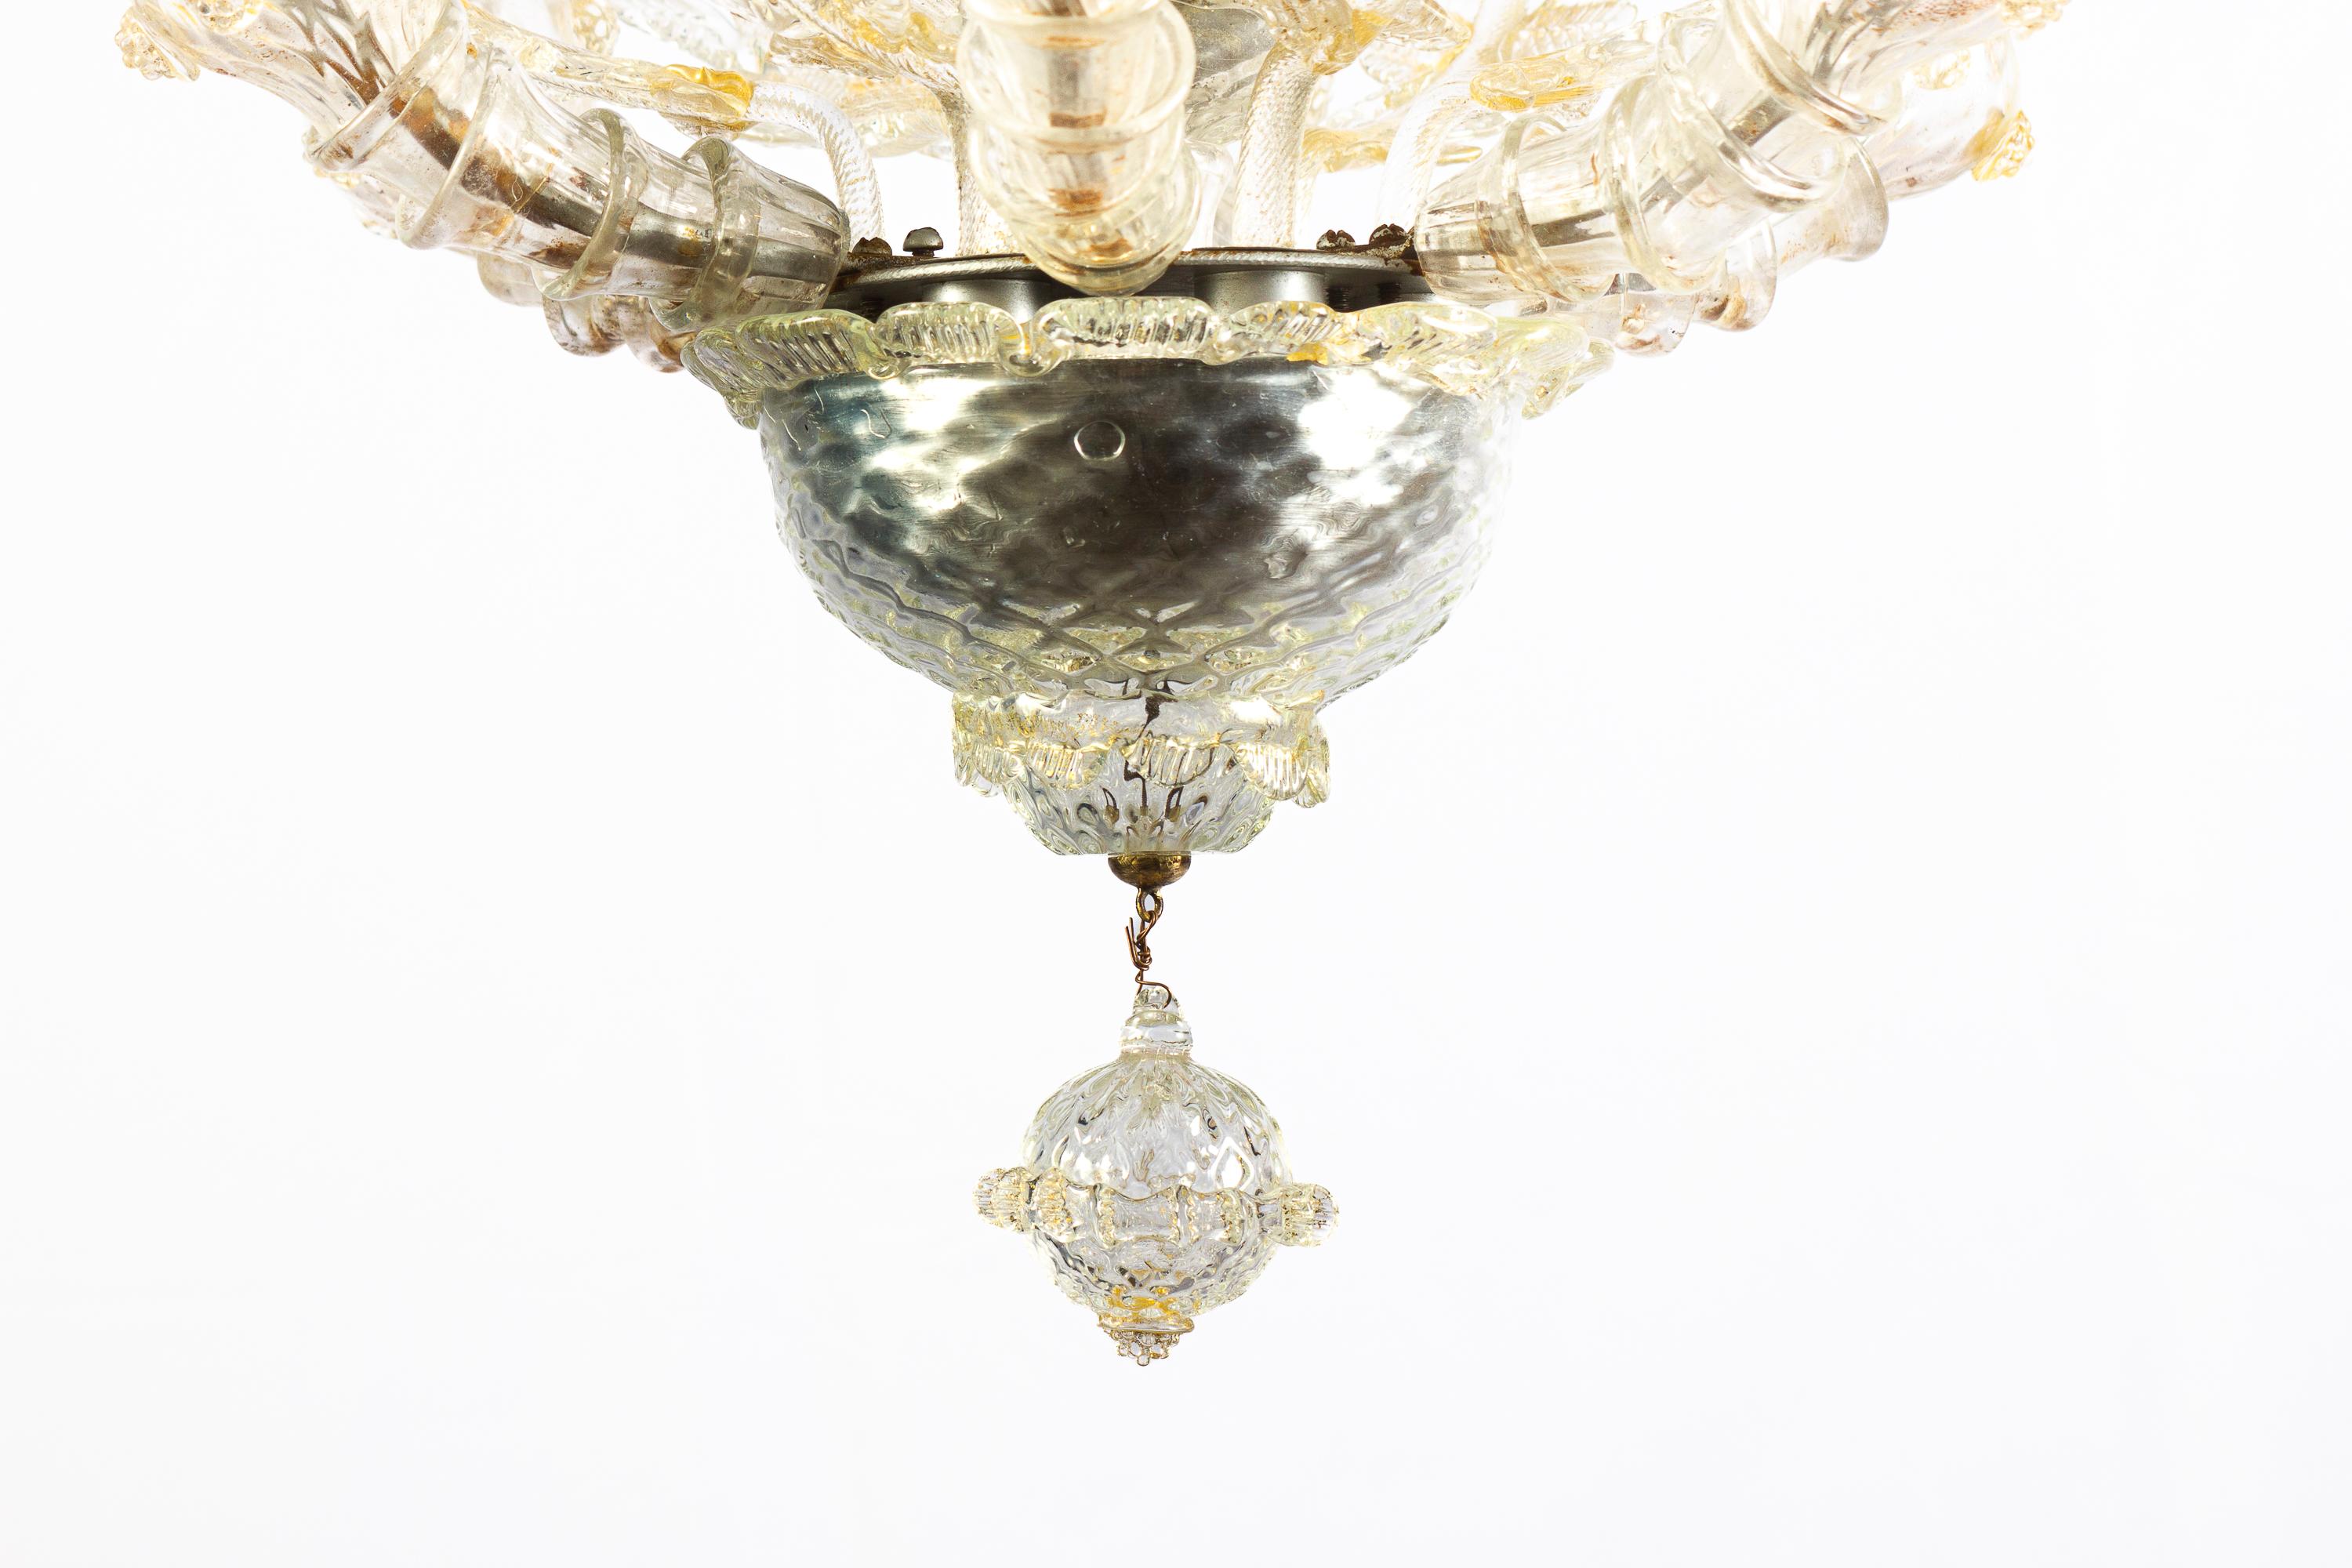 Mid-20th Century Overwhelming Murano Glass Lantern or Chandelier by Barovier & Toso, 1940' For Sale